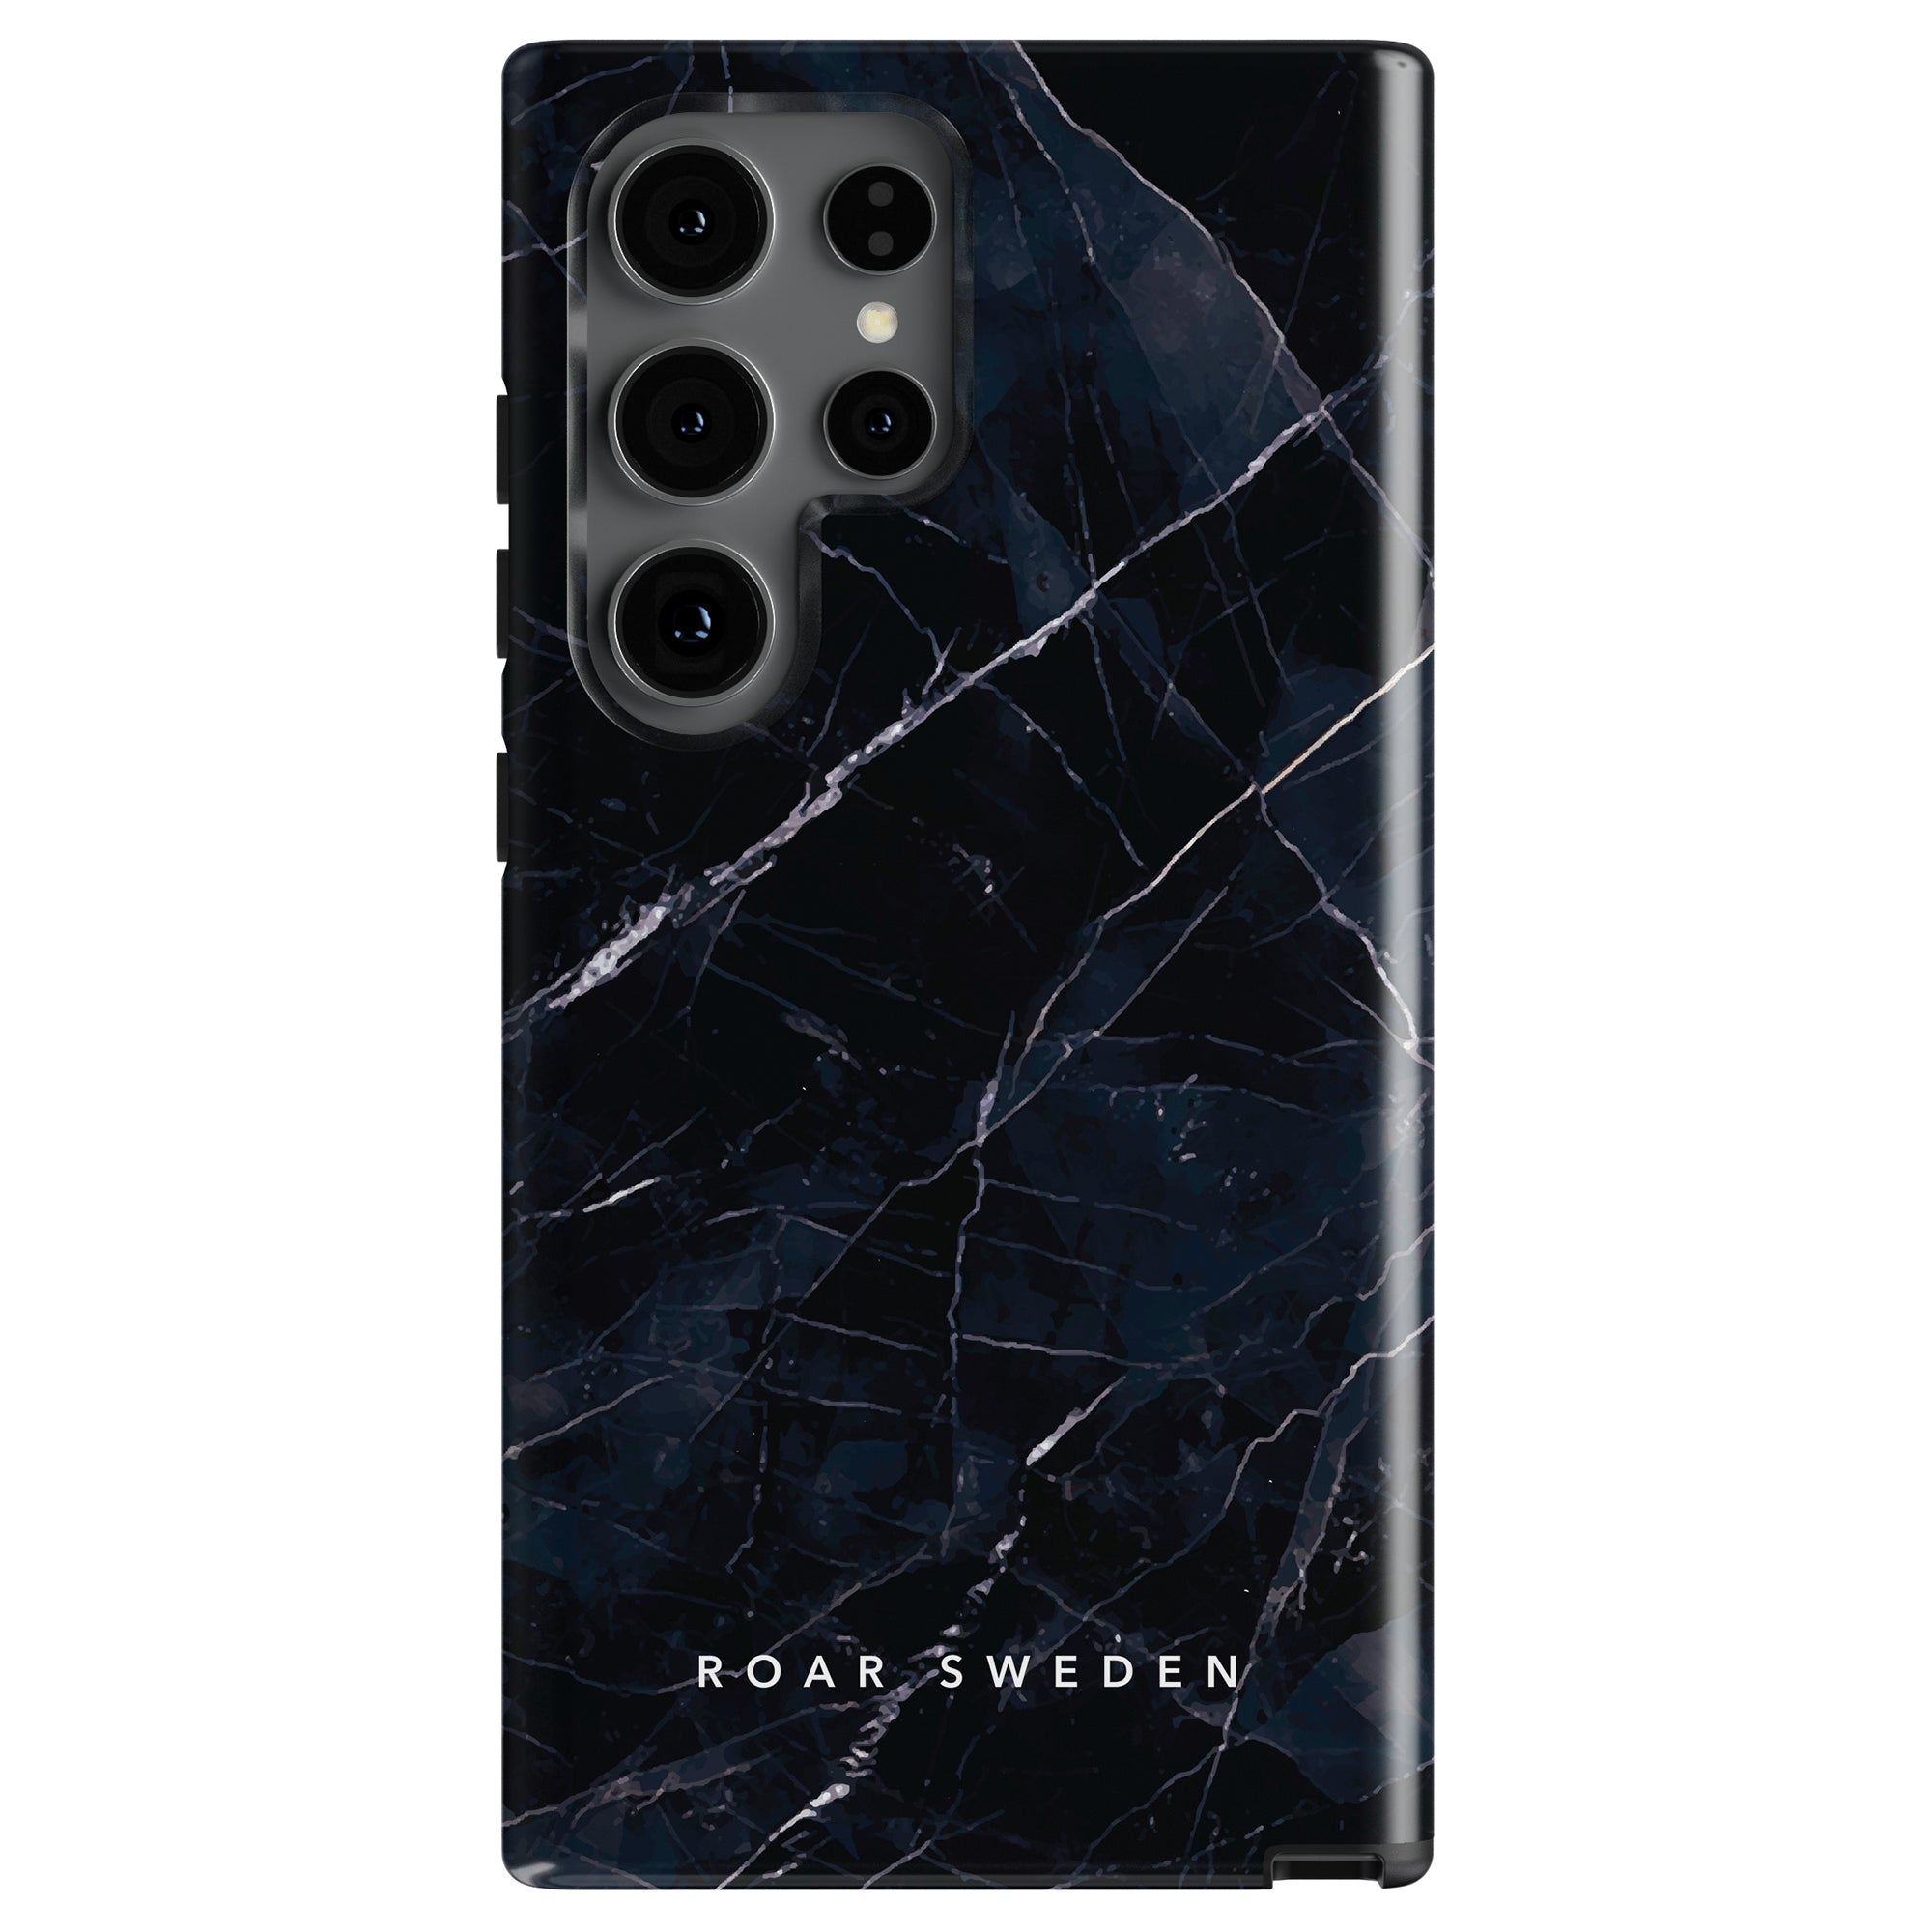 A Nero - Tough case with a svart marmor design featuring white veins and "Roar Sweden" branded text at the bottom. This mobilskal has cutouts for four camera lenses and a flash, providing elegant protection for your device.